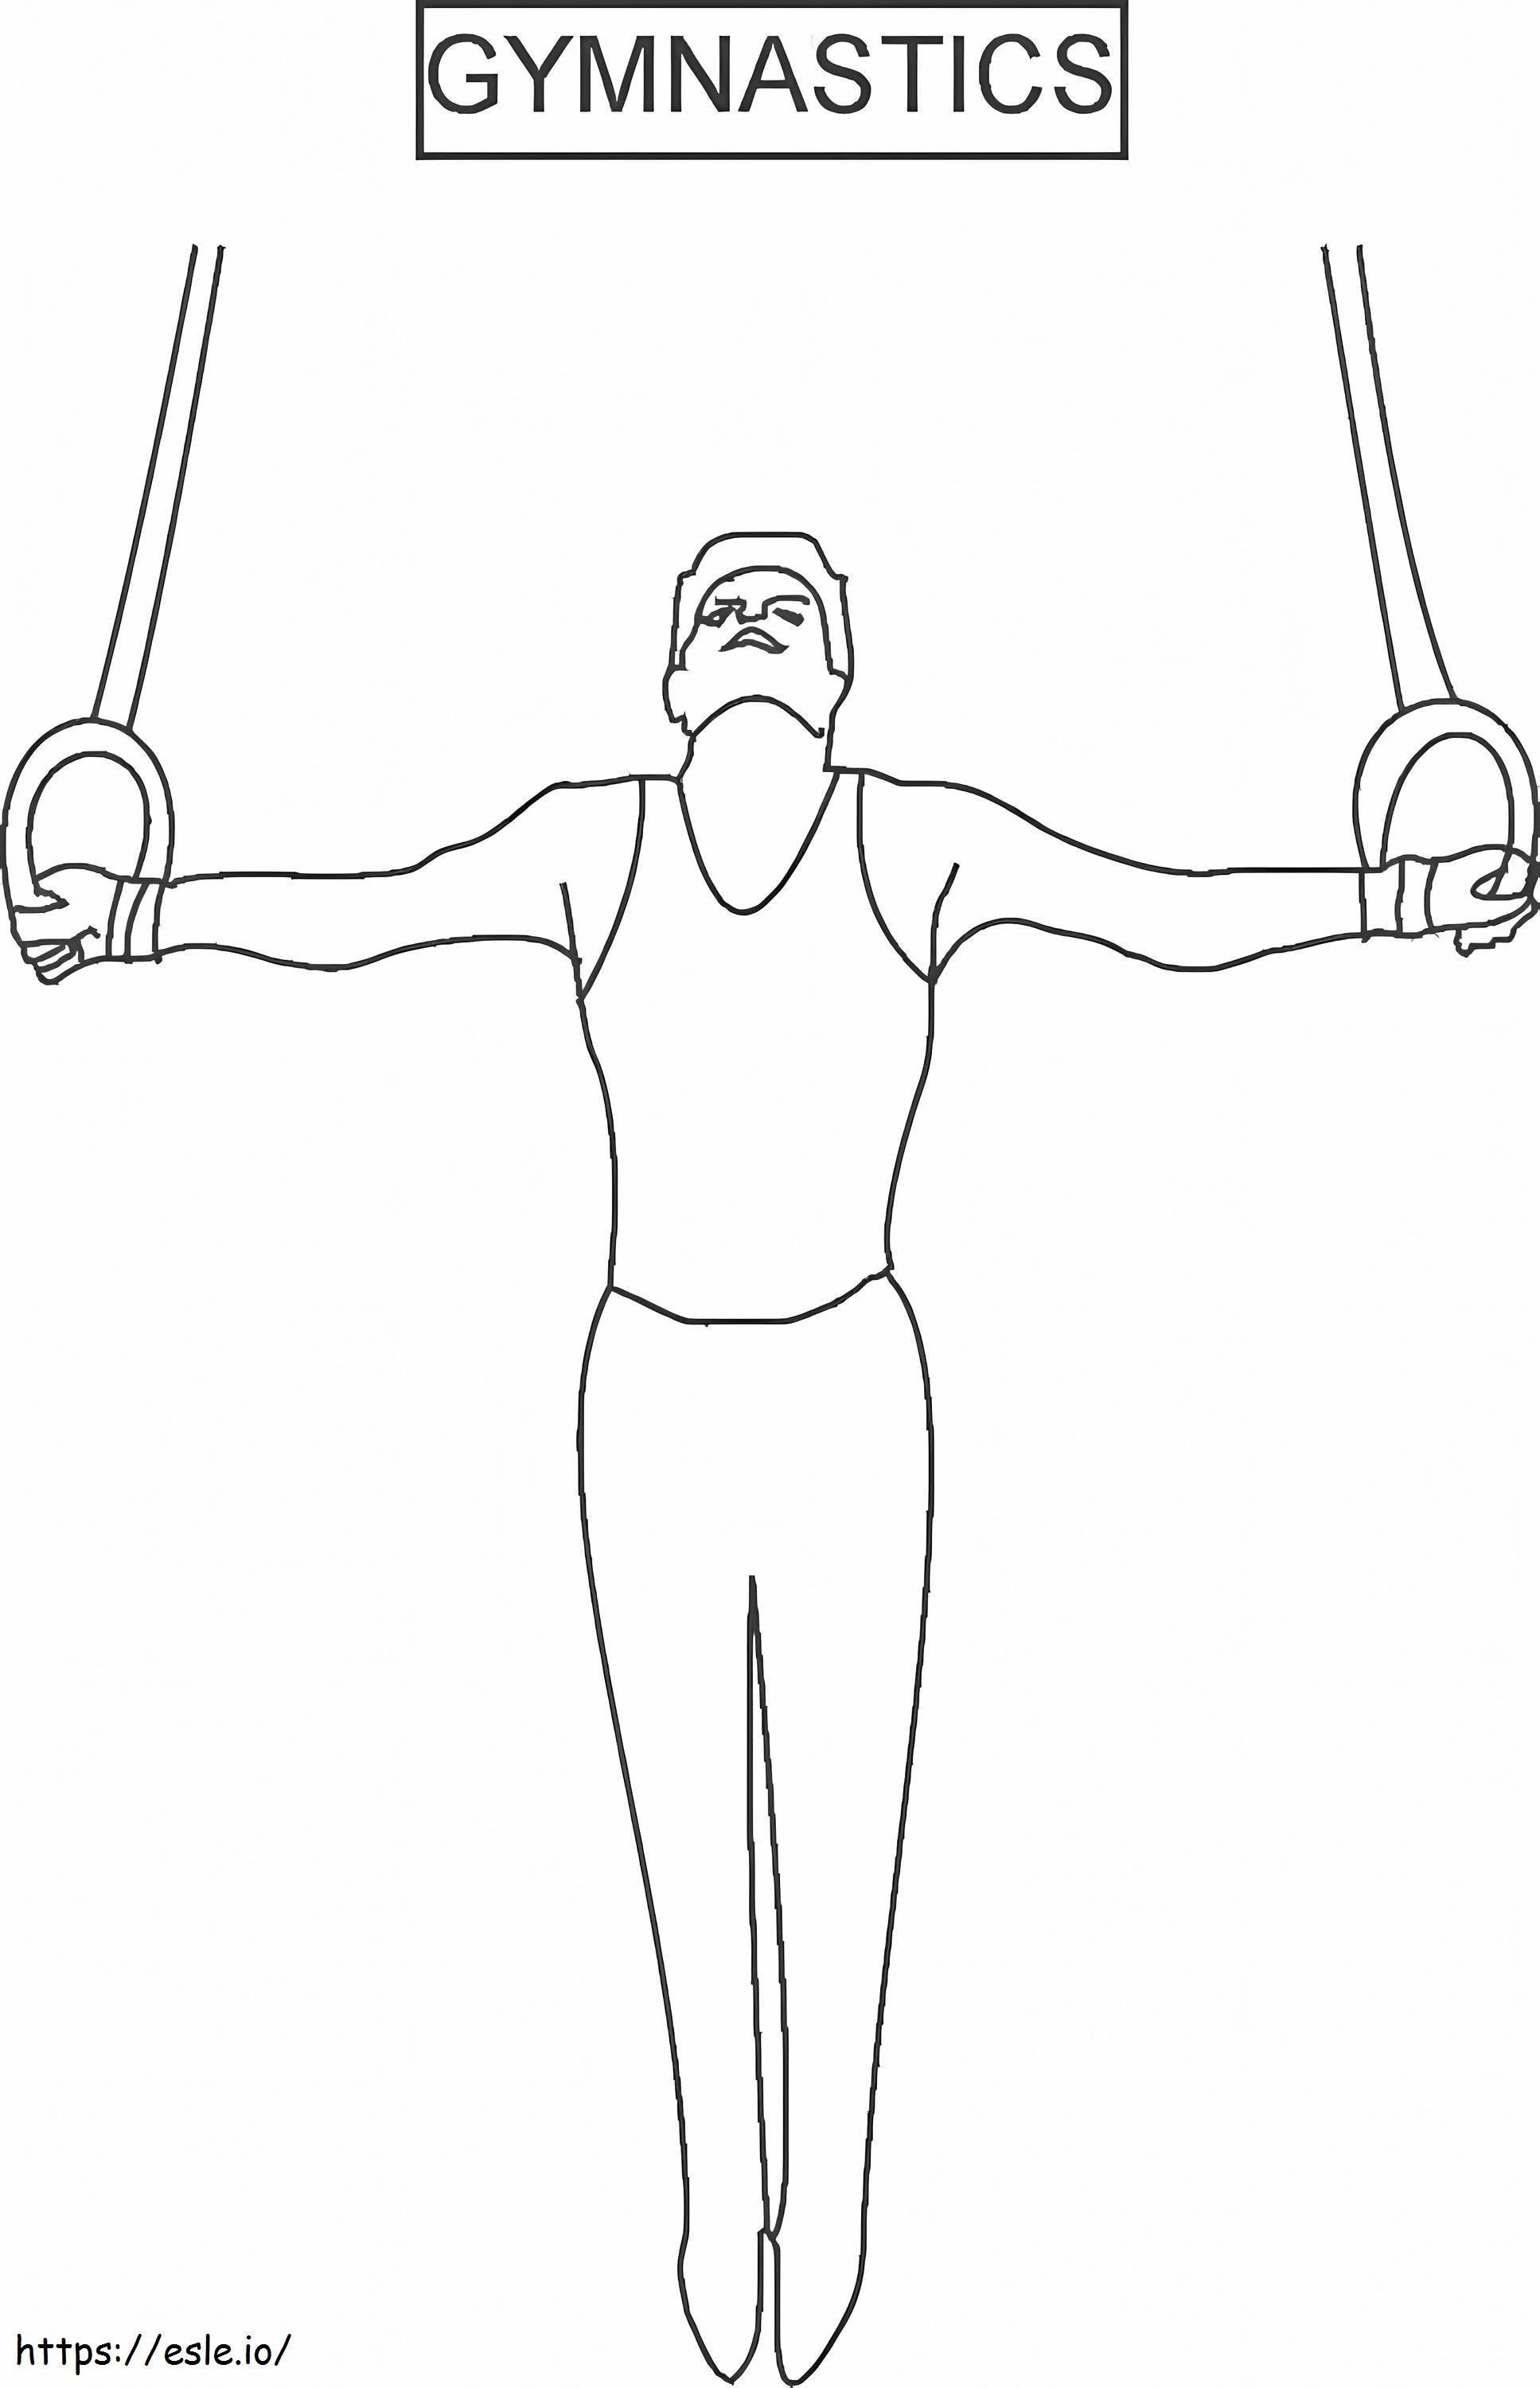 Artistic Gymnastics Rings coloring page